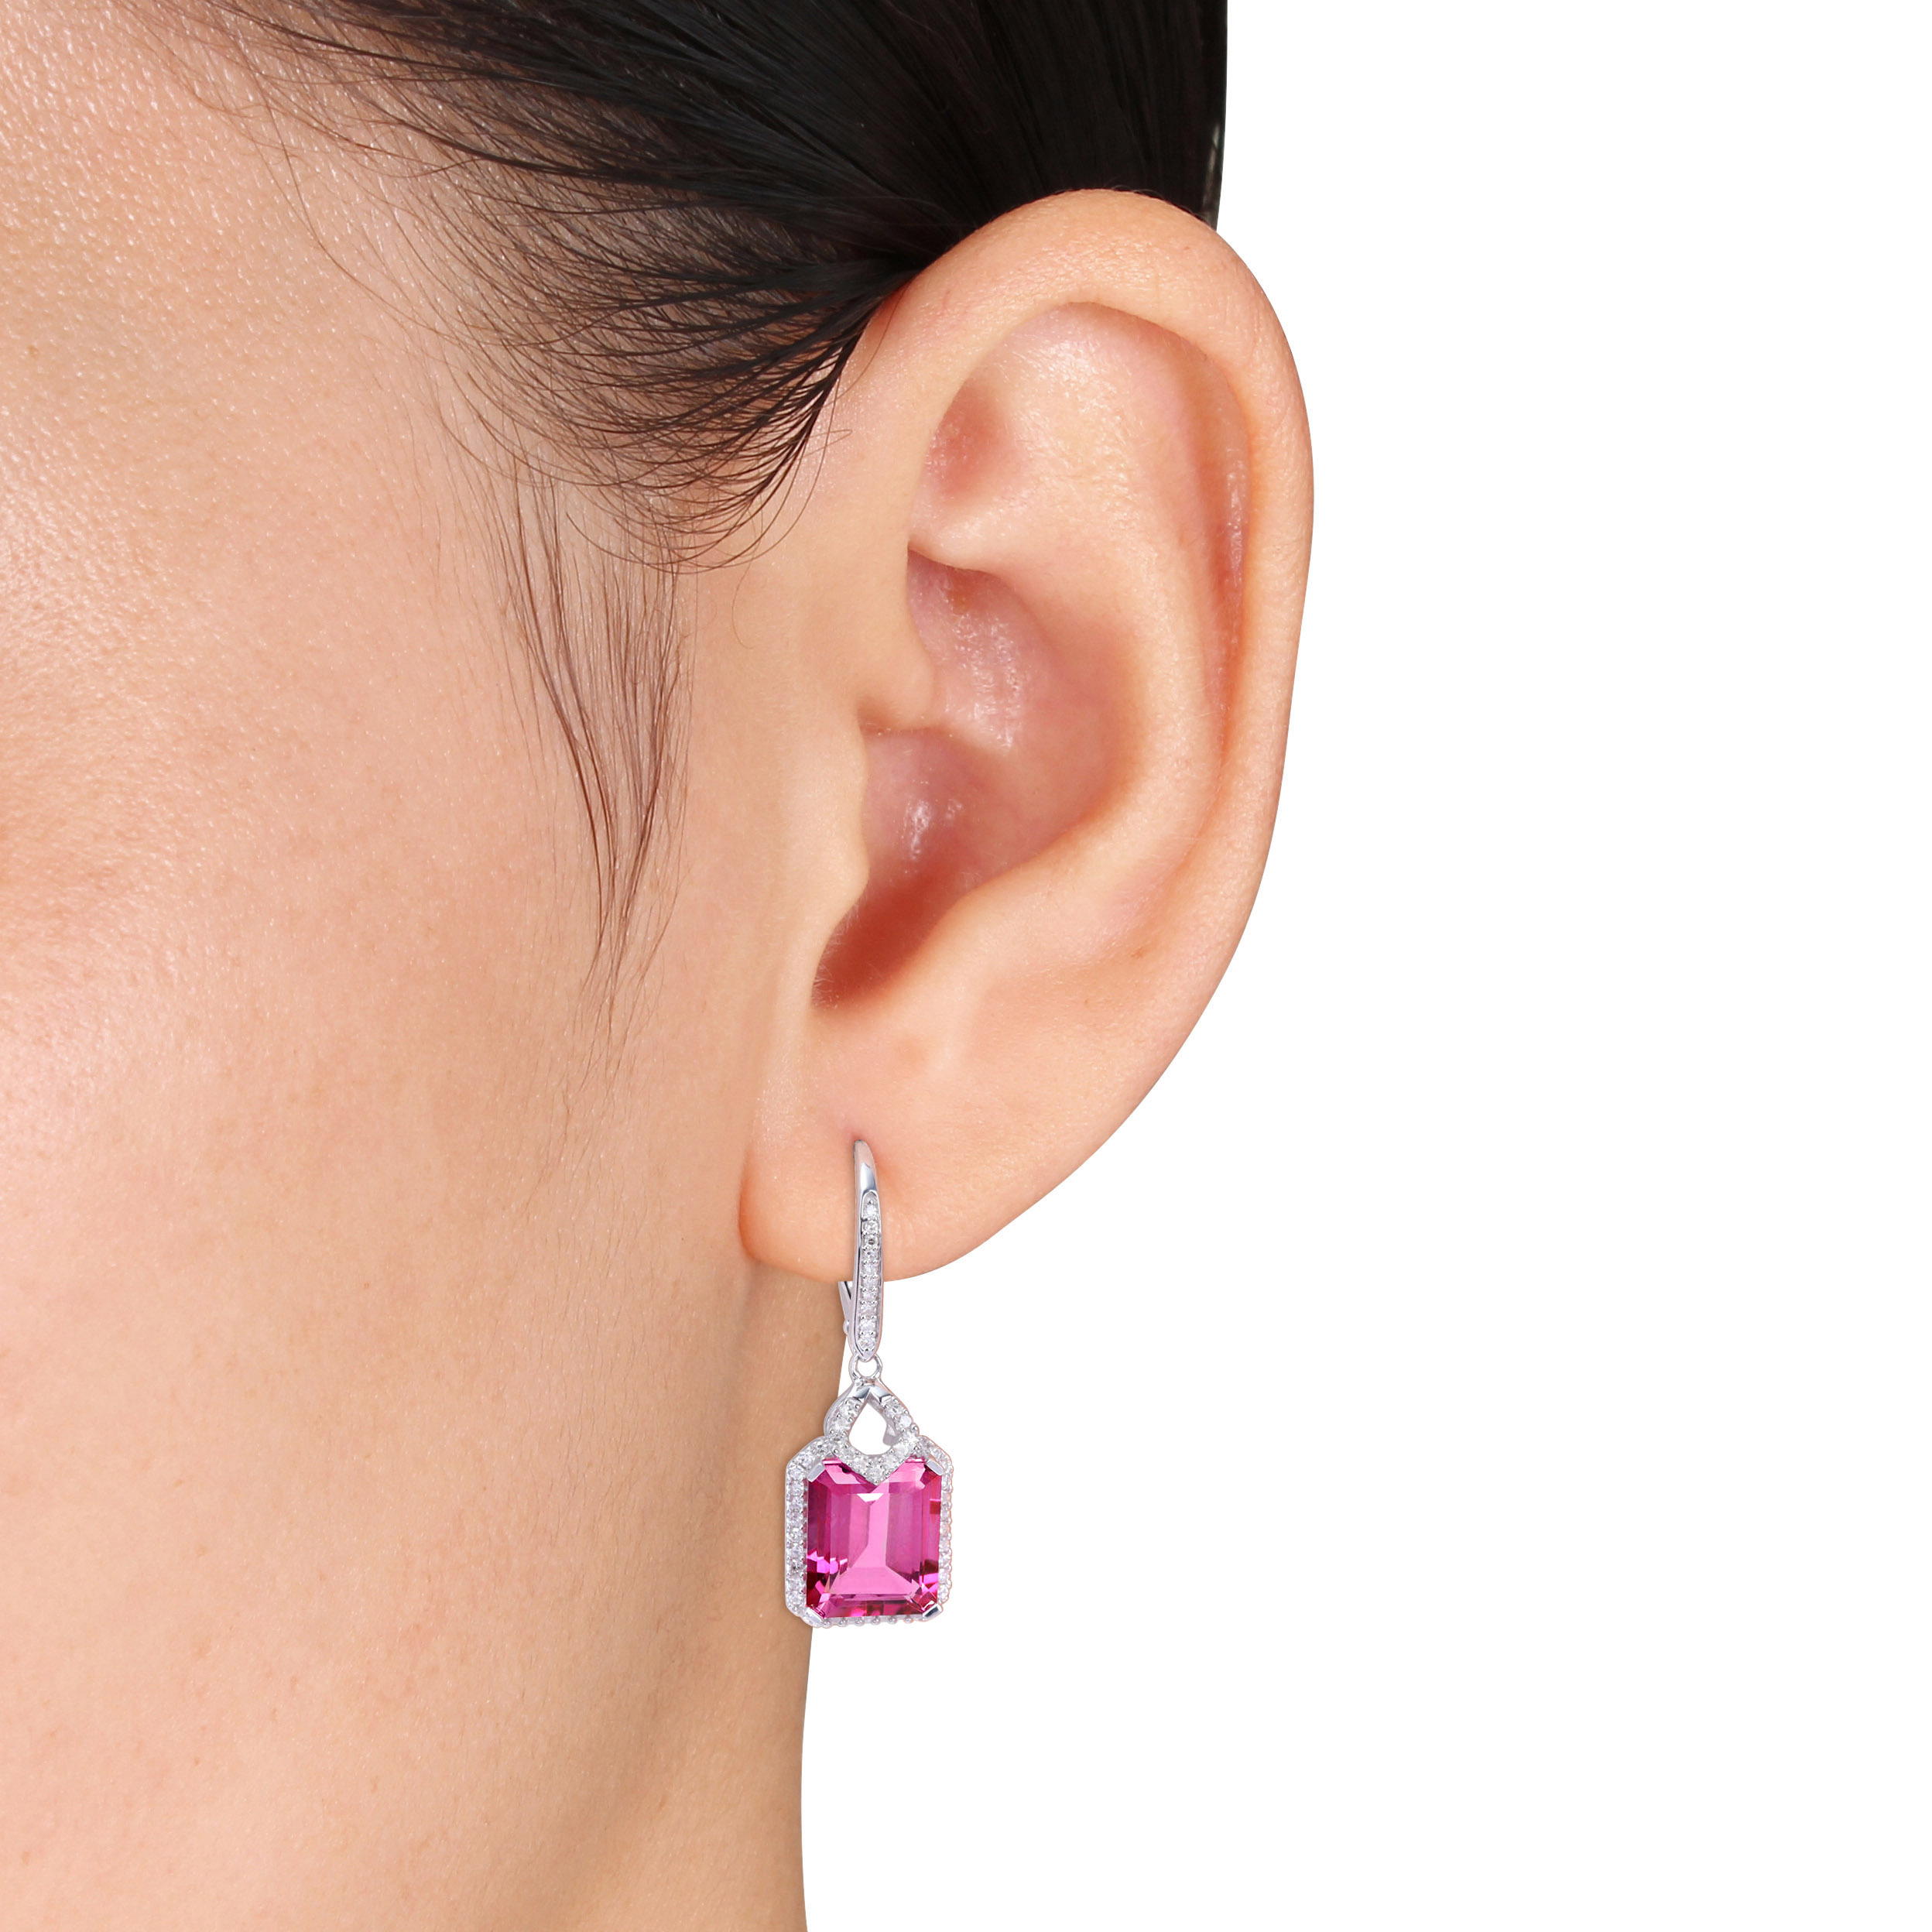 11 1/7 CT TGW Pink Topaz and 1/2 CT TW Diamond Halo Leverback Earrings in Sterling Silver